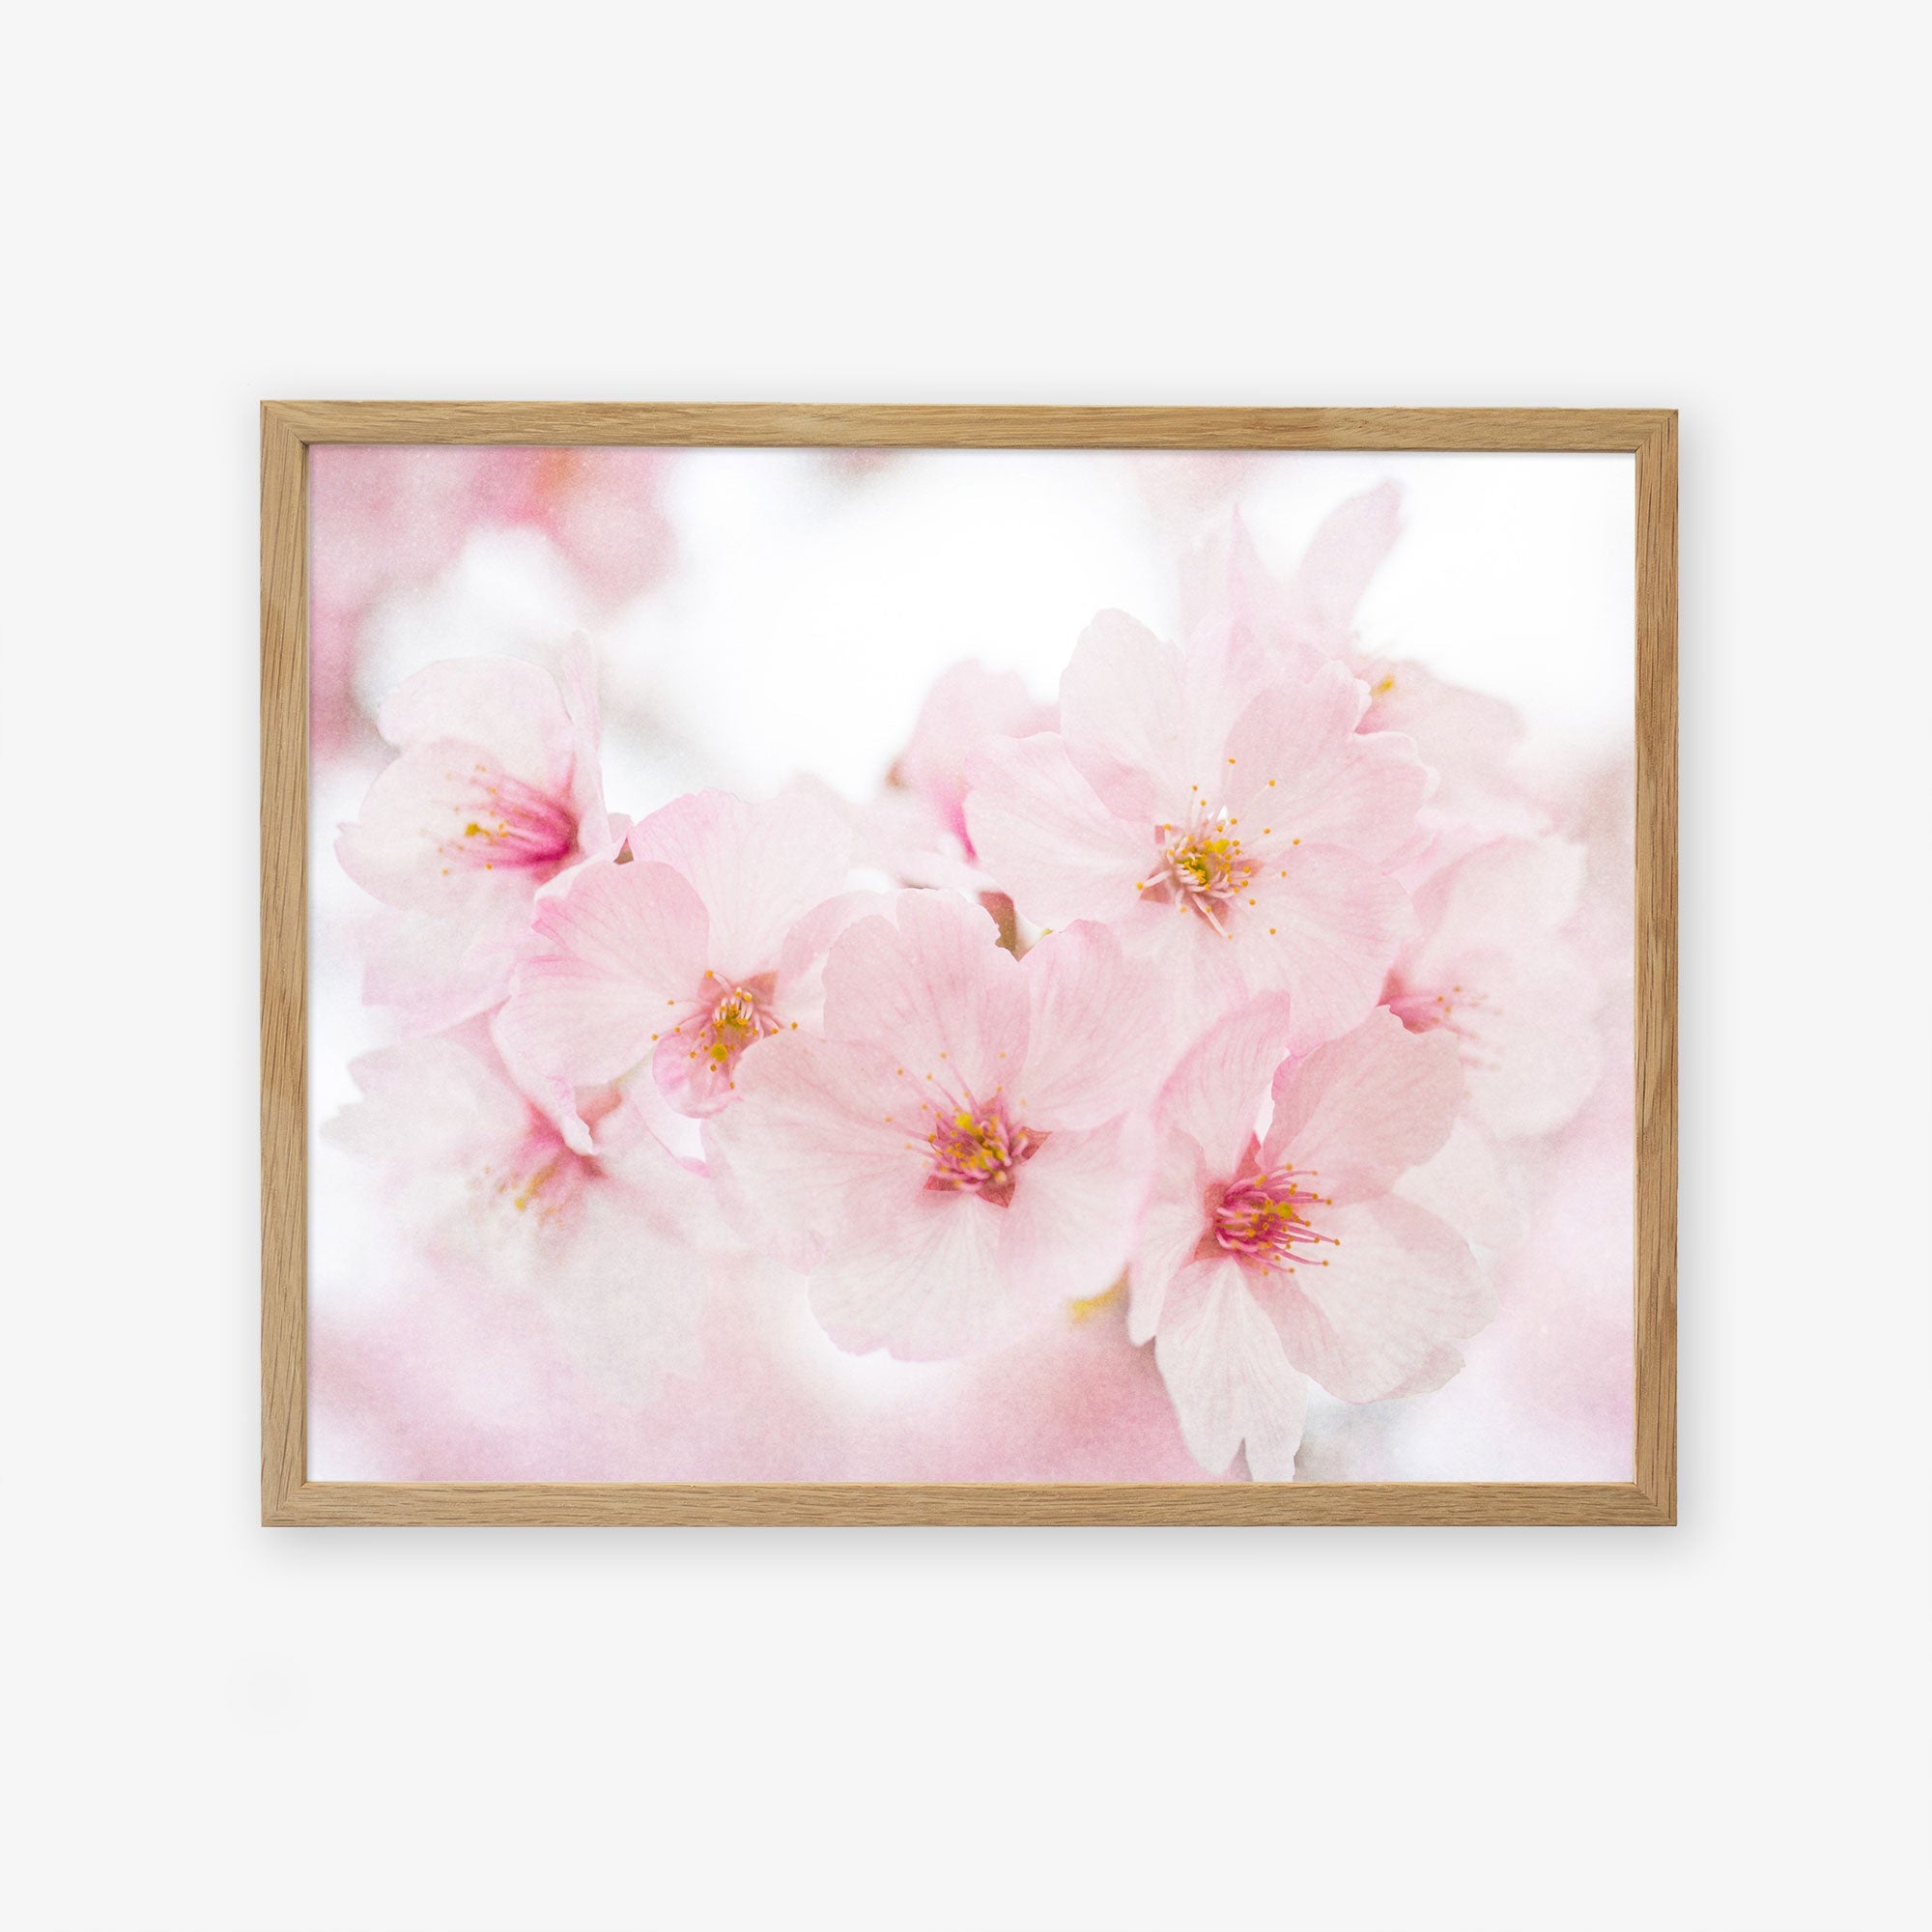 A framed photograph of Pink Flower Print, &#39;Cherry Blossom&#39; by Offley Green, showcasing delicate petals and yellow stamens, printed on archival photographic paper and displayed within a light wooden frame.